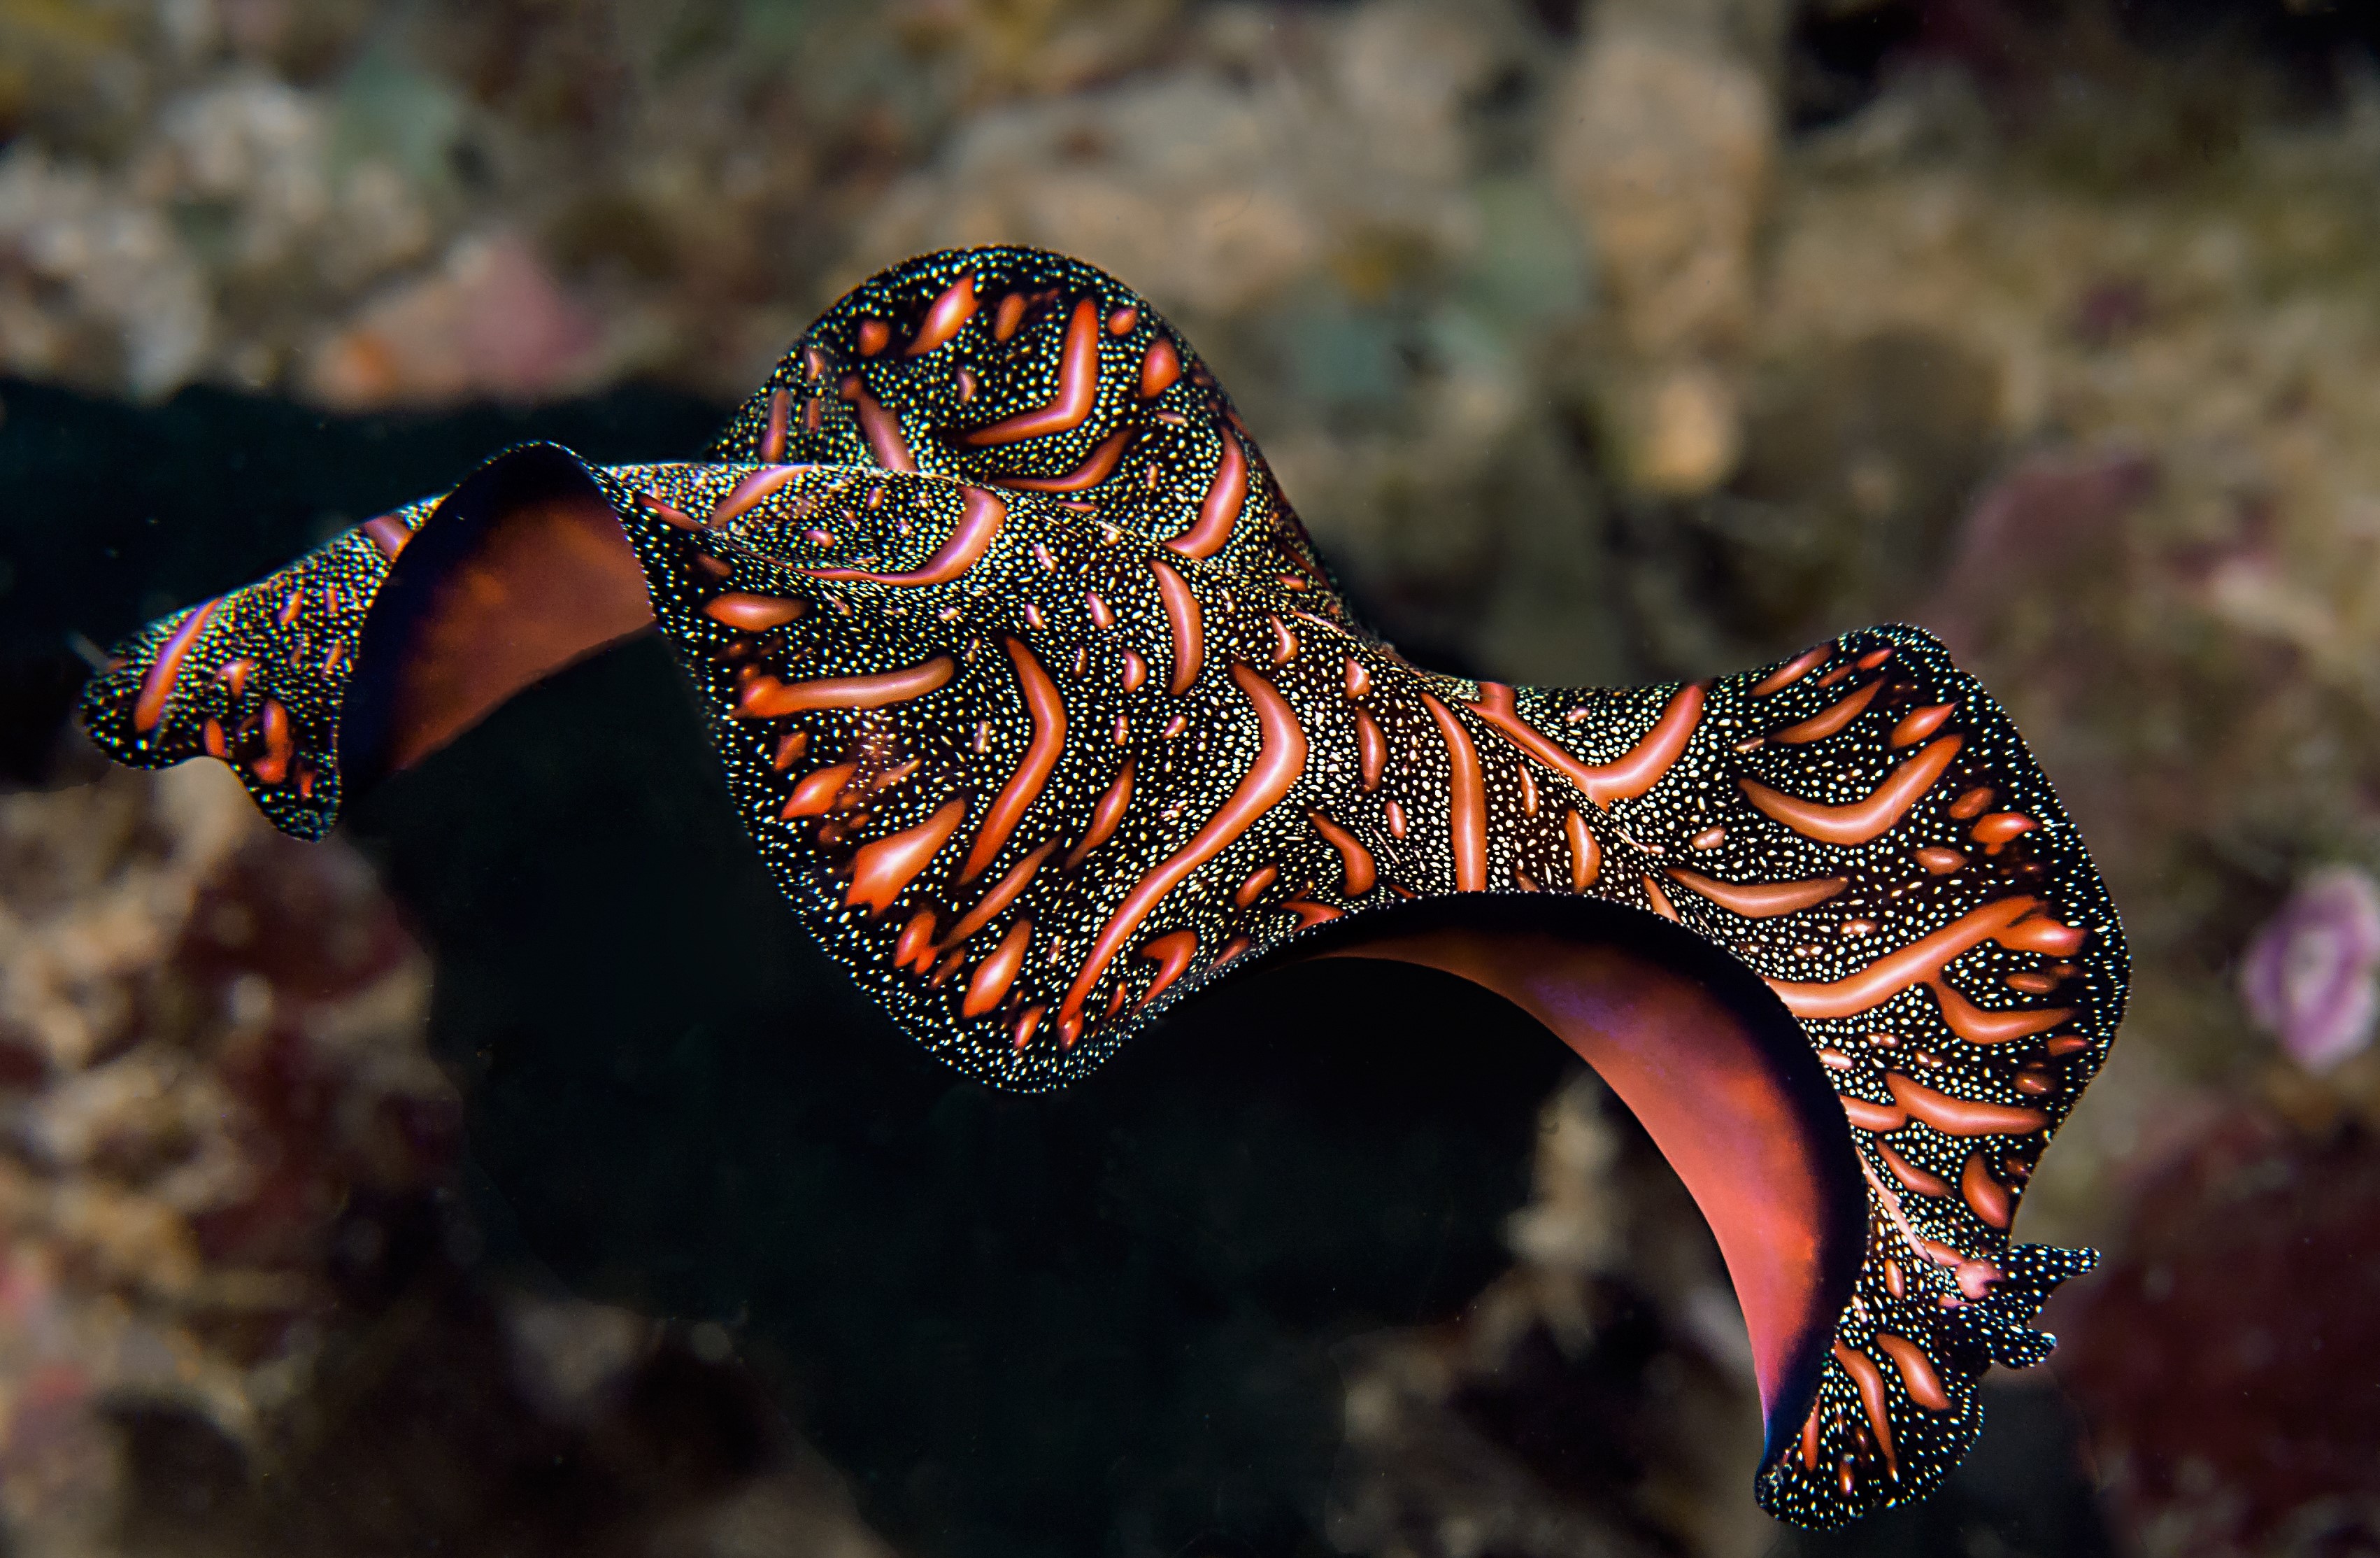 Pink and black flatworm